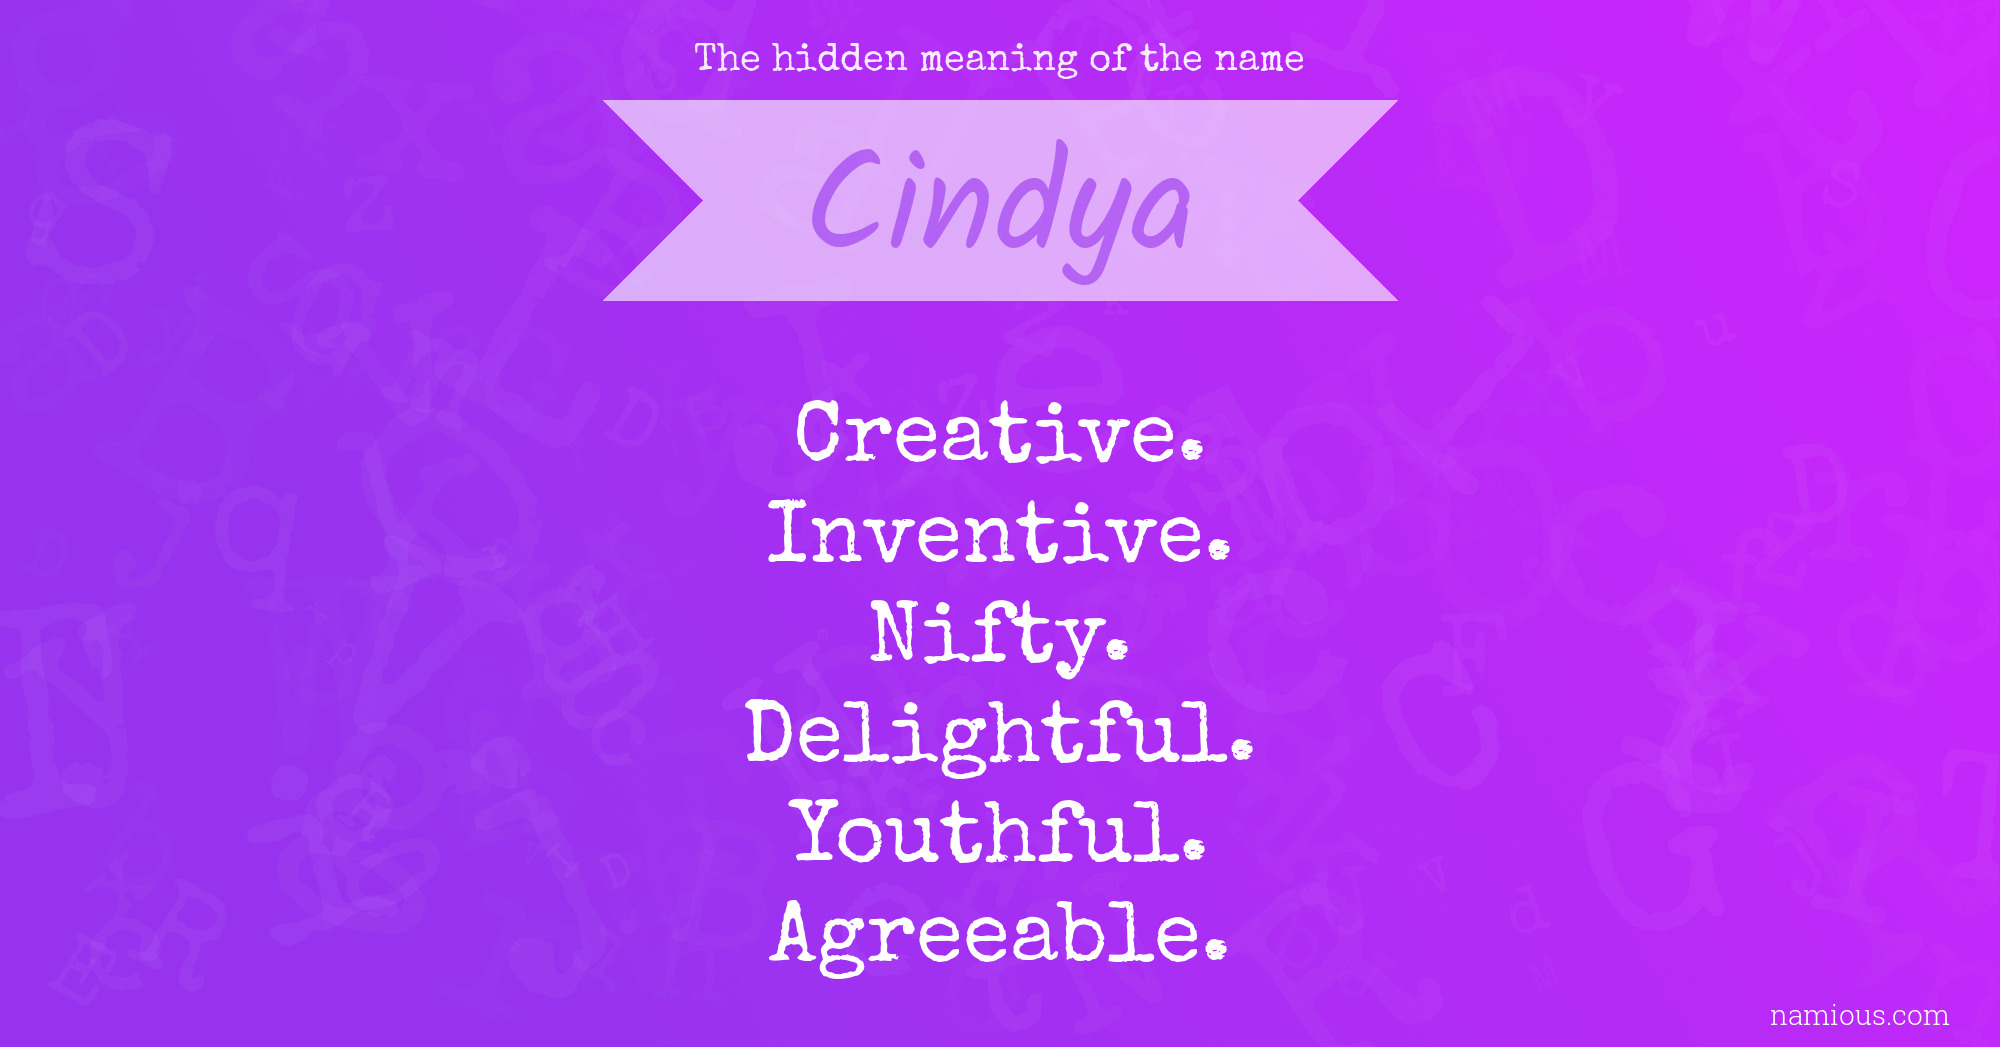 The hidden meaning of the name Cindya